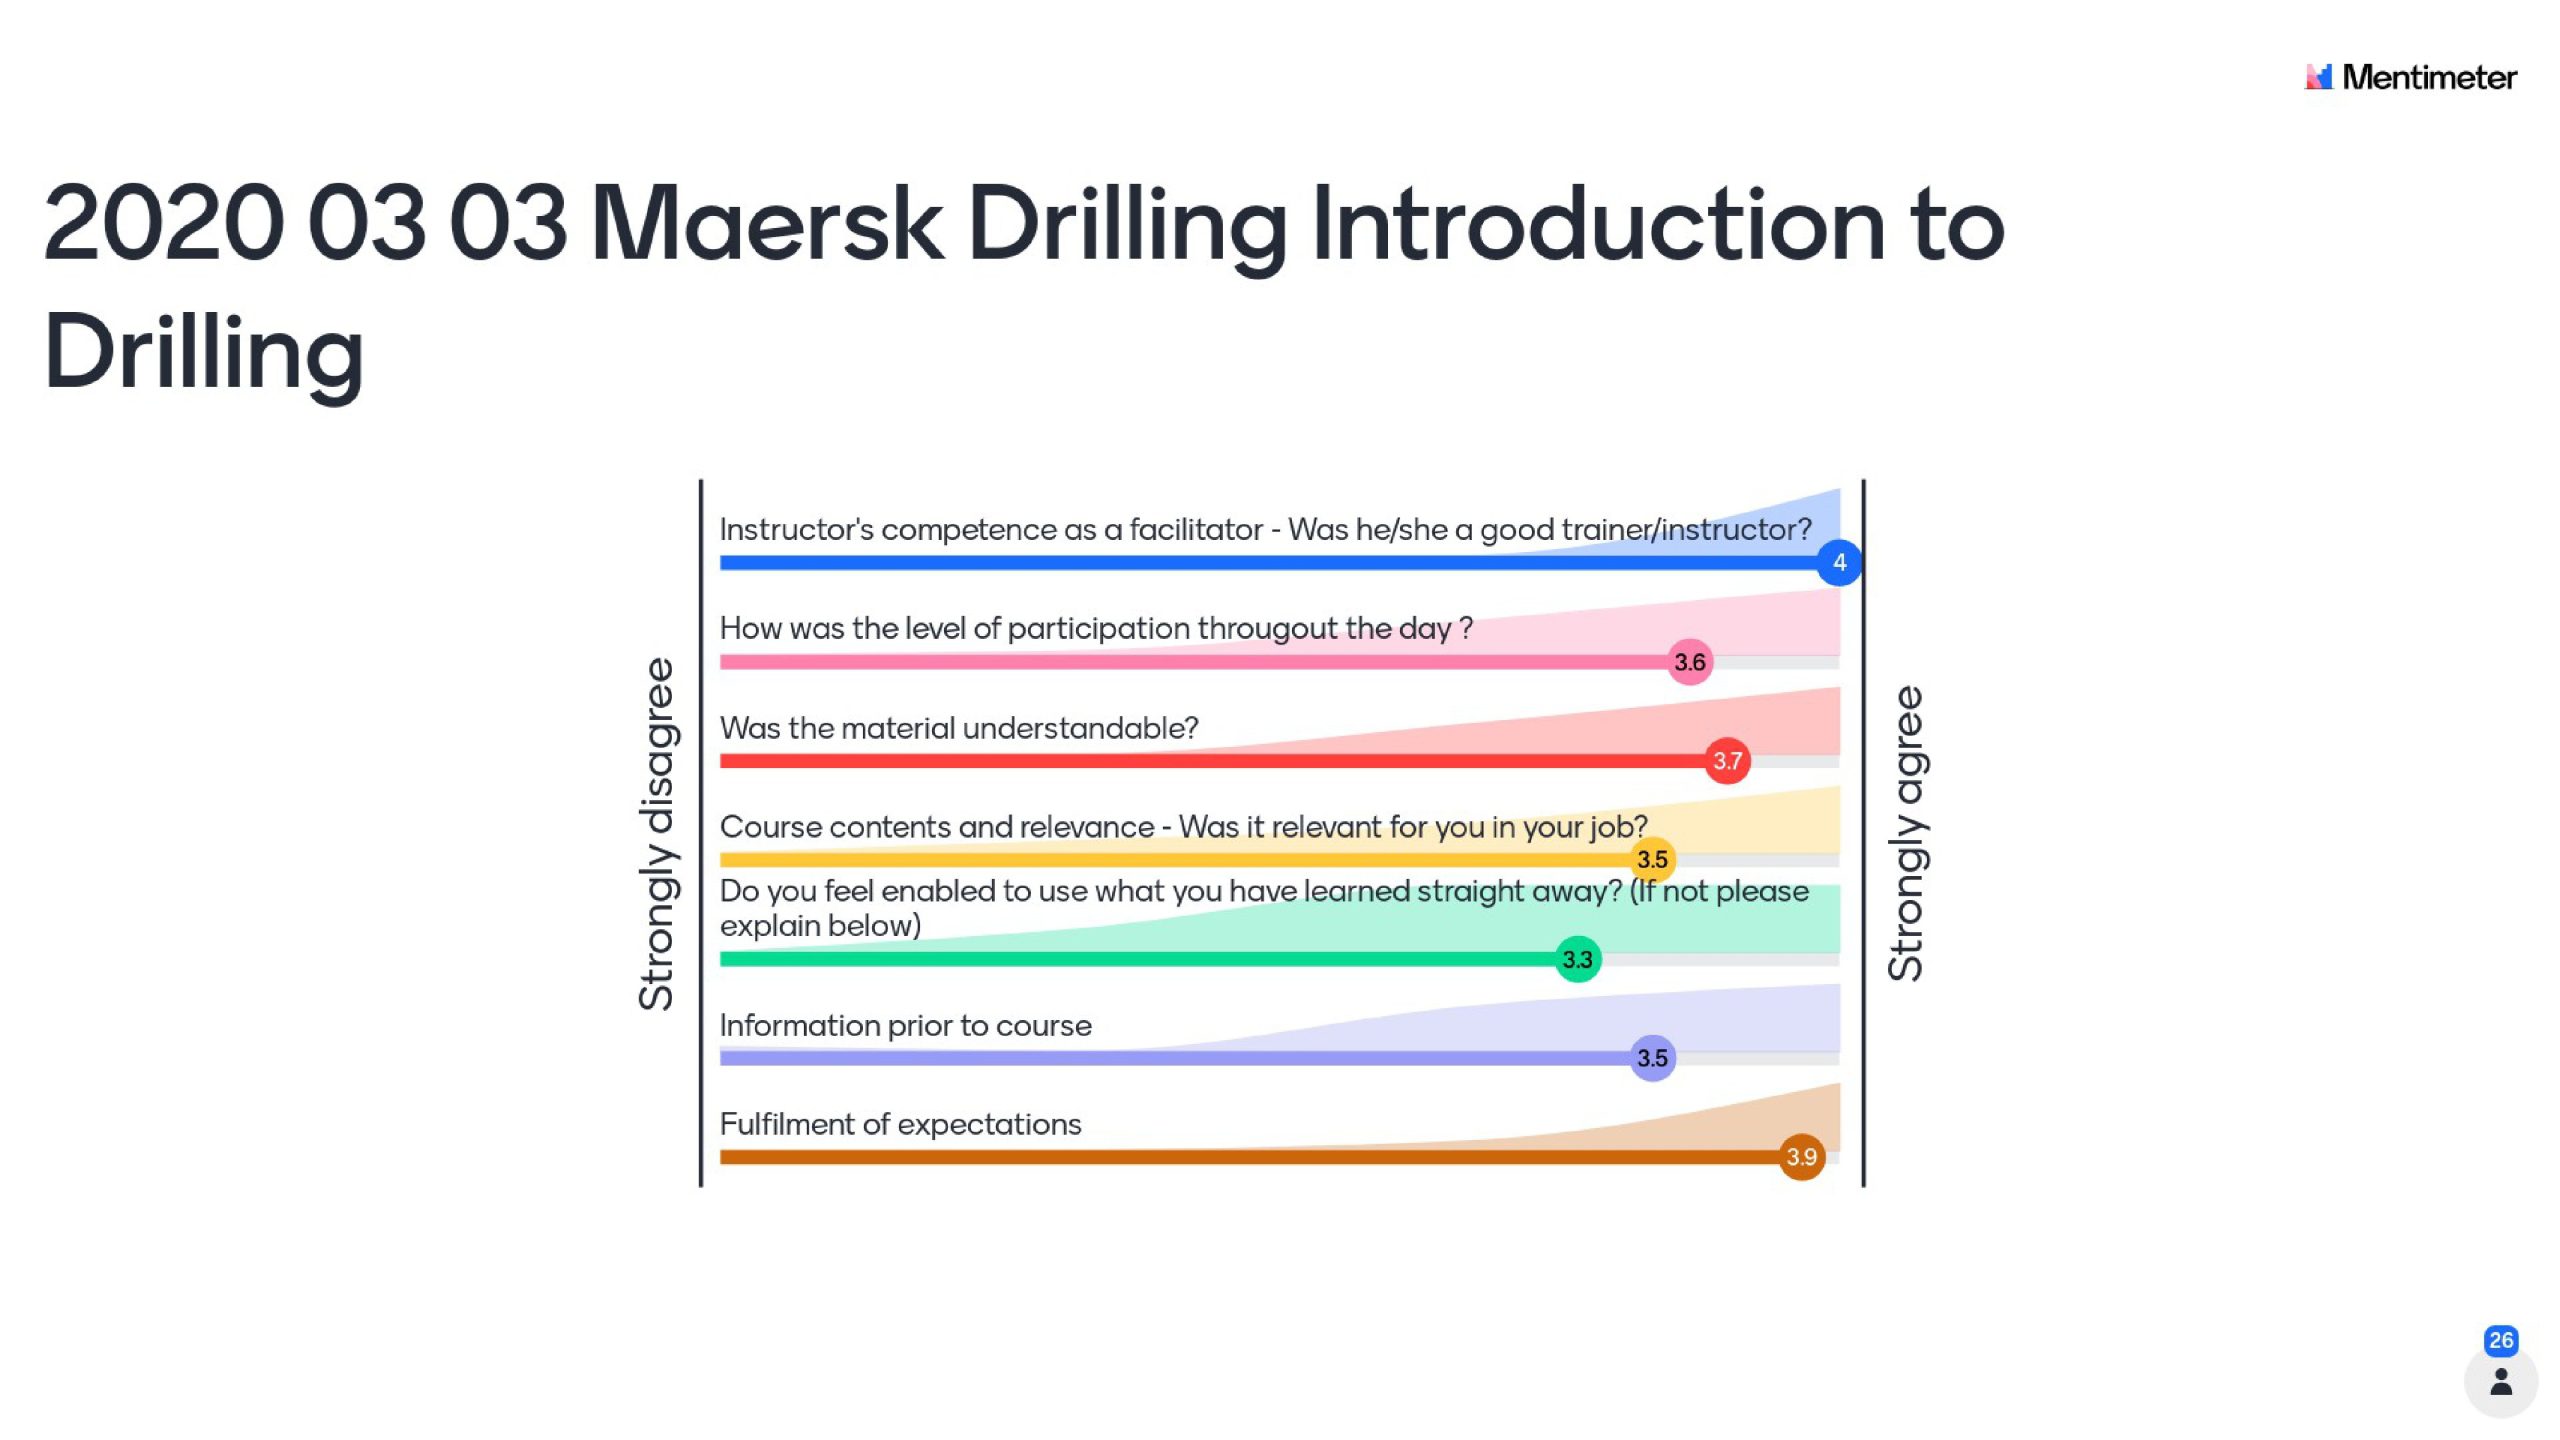 2020 03 03 Maersk Drilling Introduction to Drilling